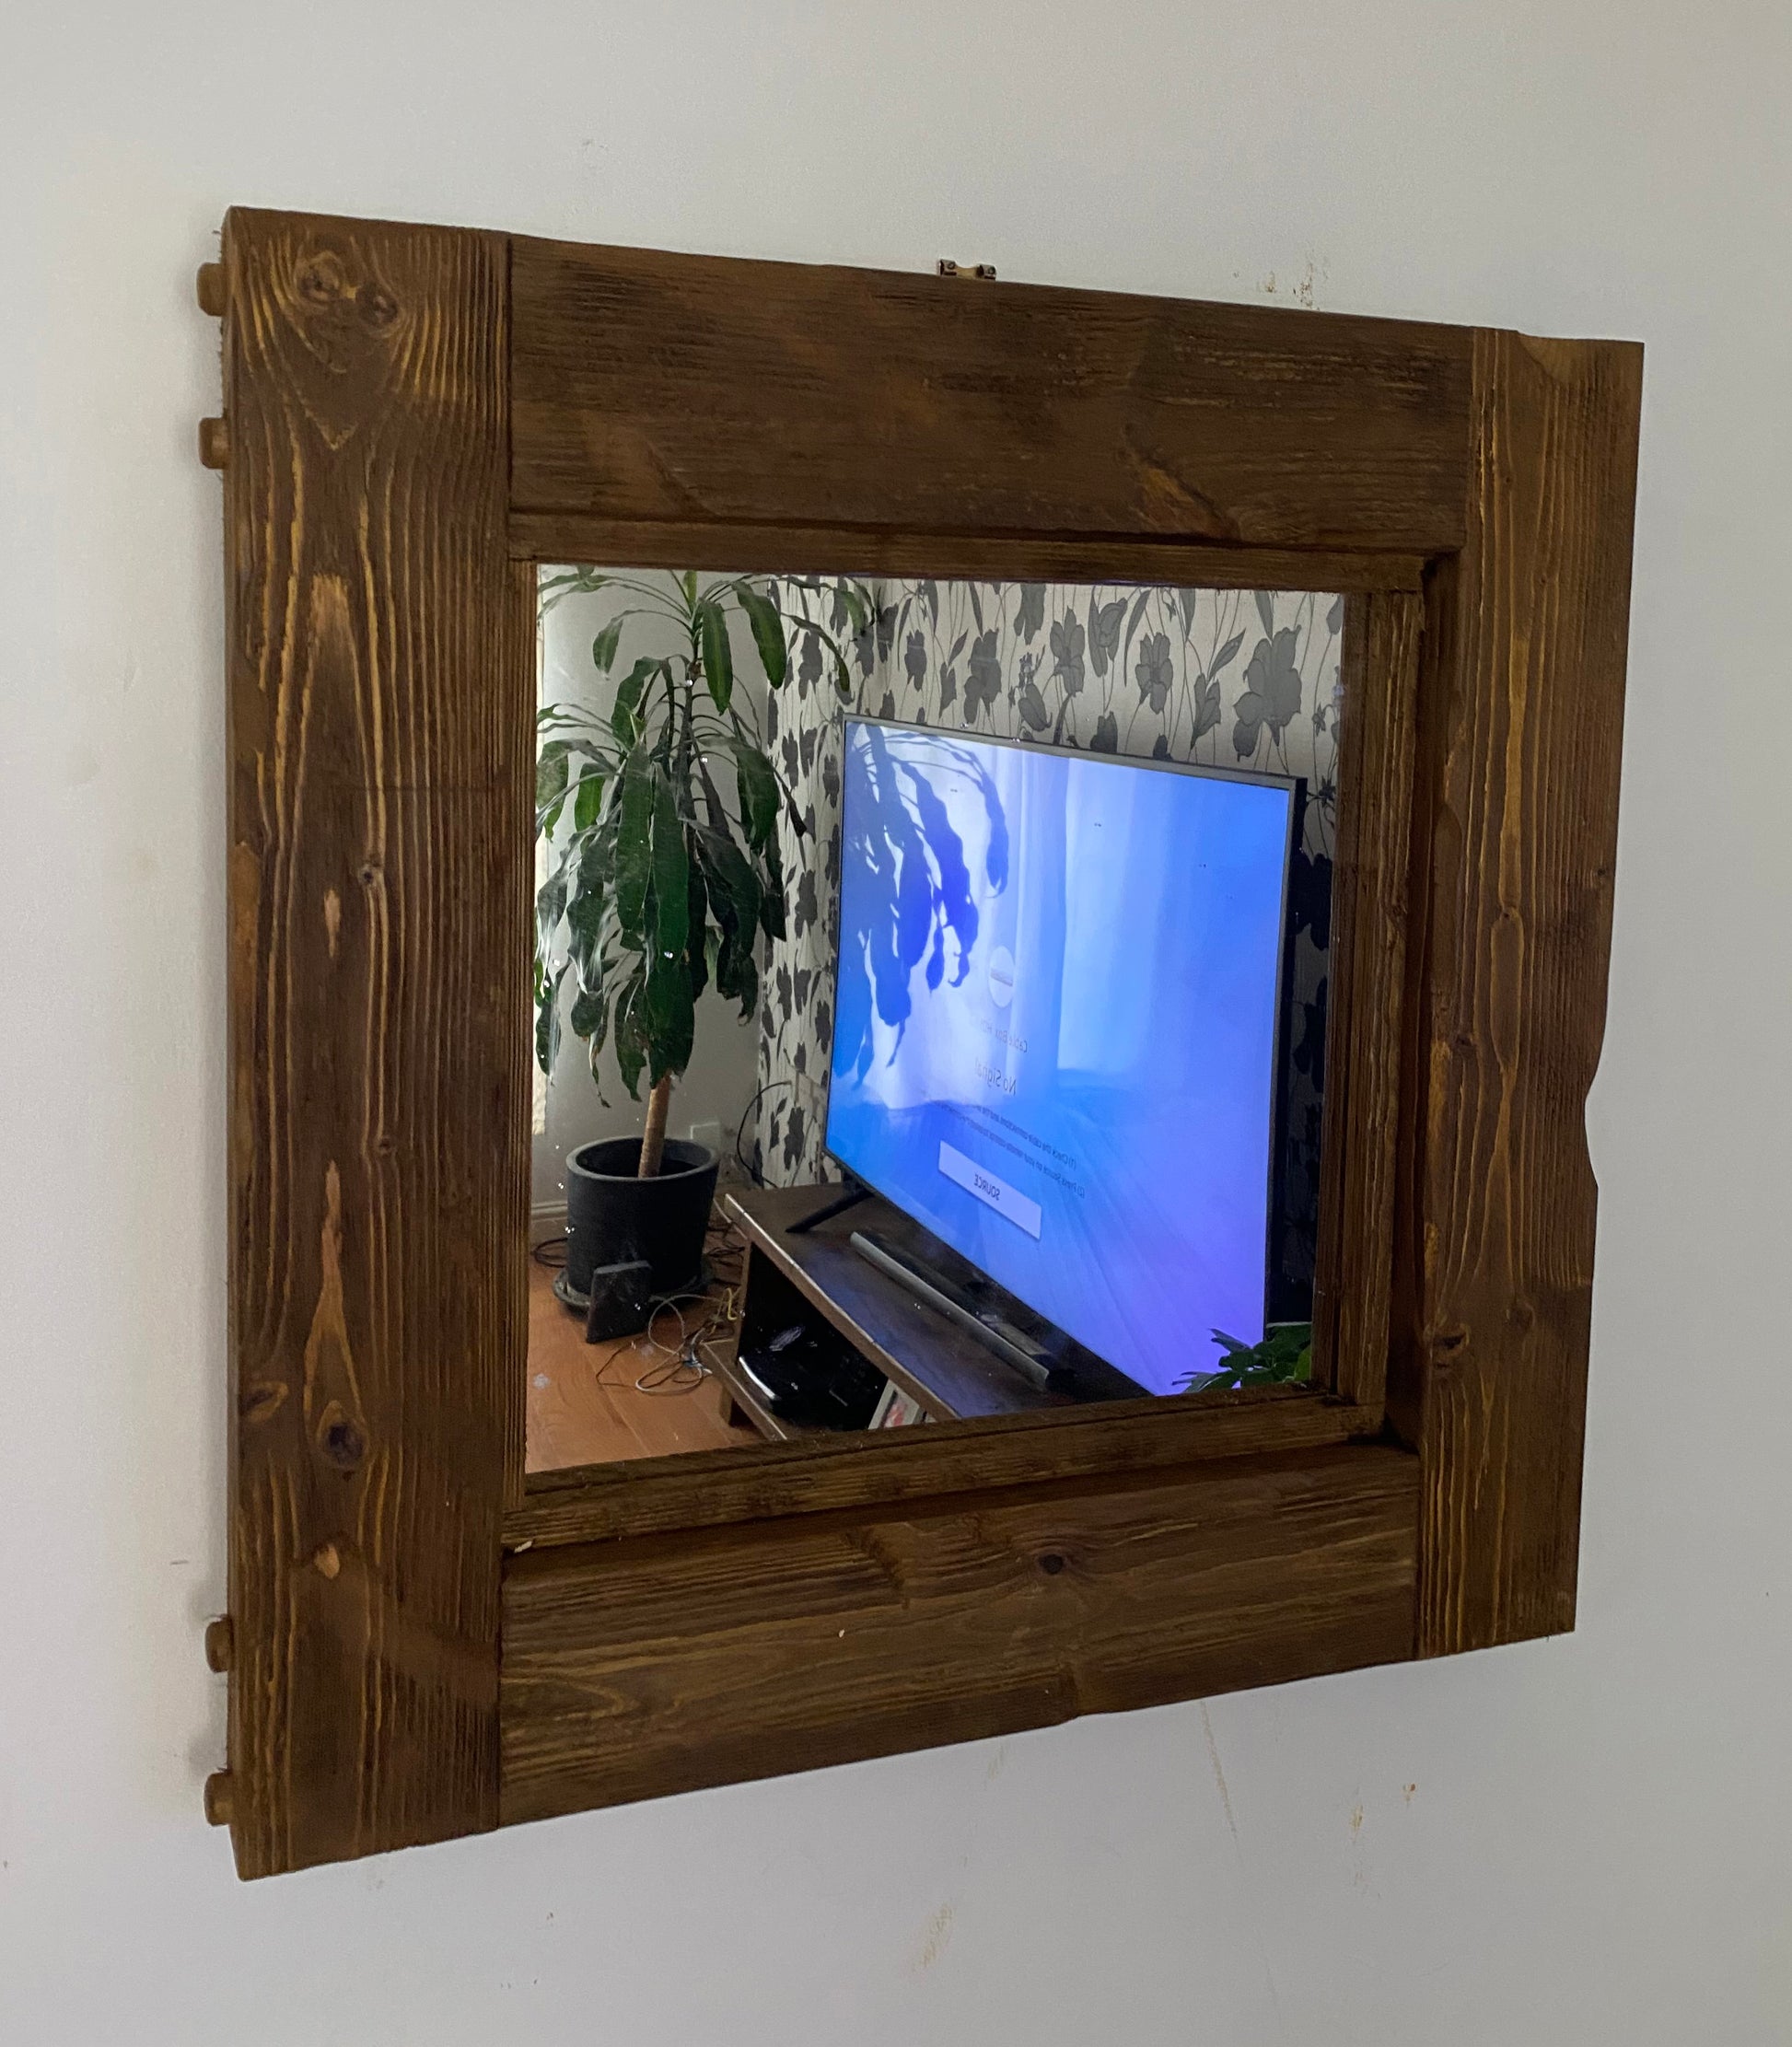 Chunky wooden mirror made from distressed timber and aged perfectly